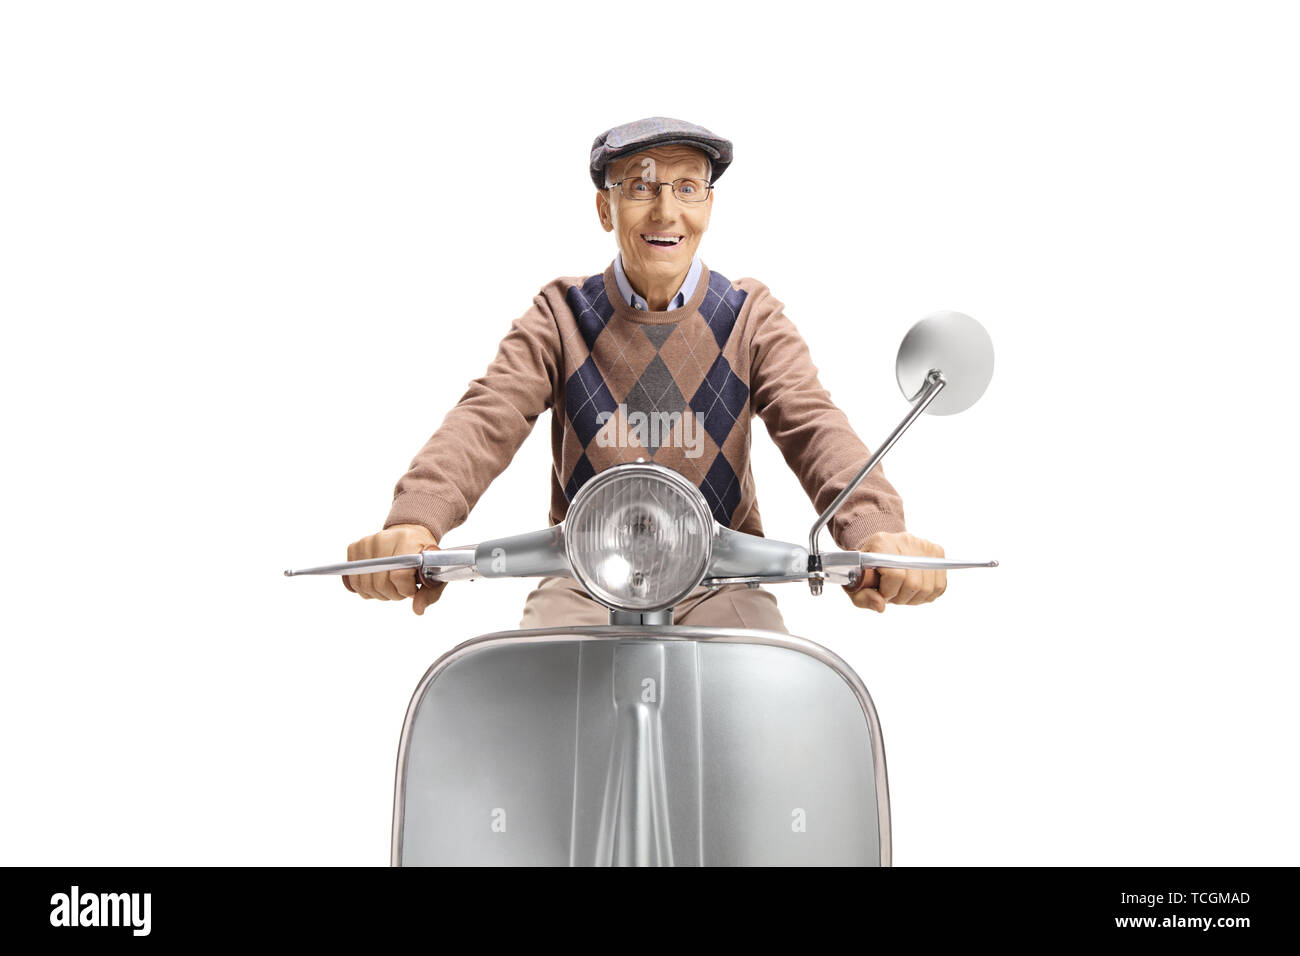 Excited elderly man riding a vintage moped isolated on white background Stock Photo